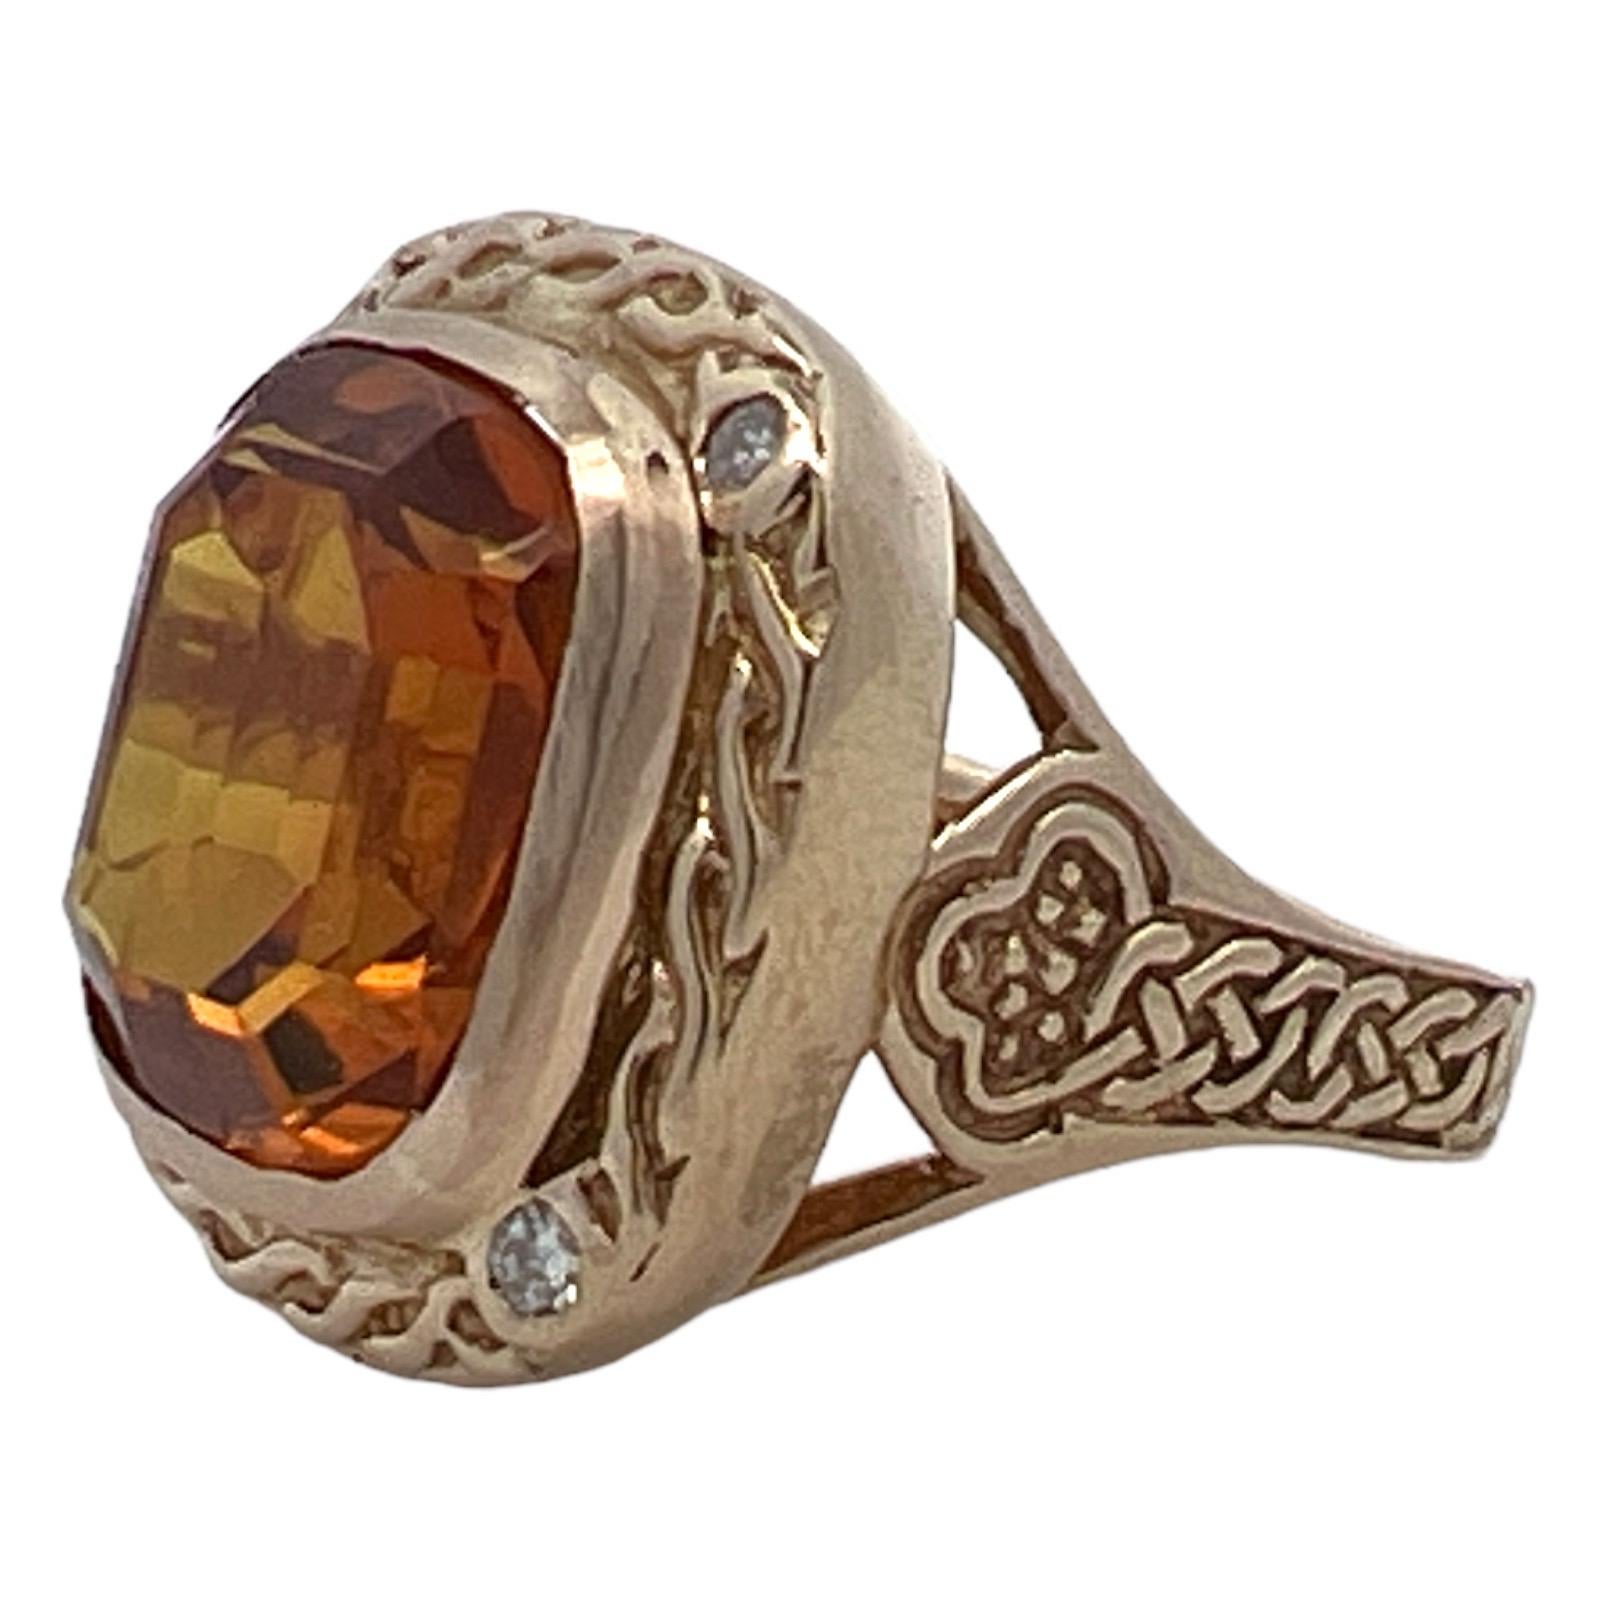 Cushion cut honey citrine diamond ring crafted in 14 karat yellow gold. The citrine measures approximately 20 x 22mm and is bezel set in a hand carved gold and diamond mounting. The 4 round briliant cut diamonds weigh approximately .12 CTW. The ring